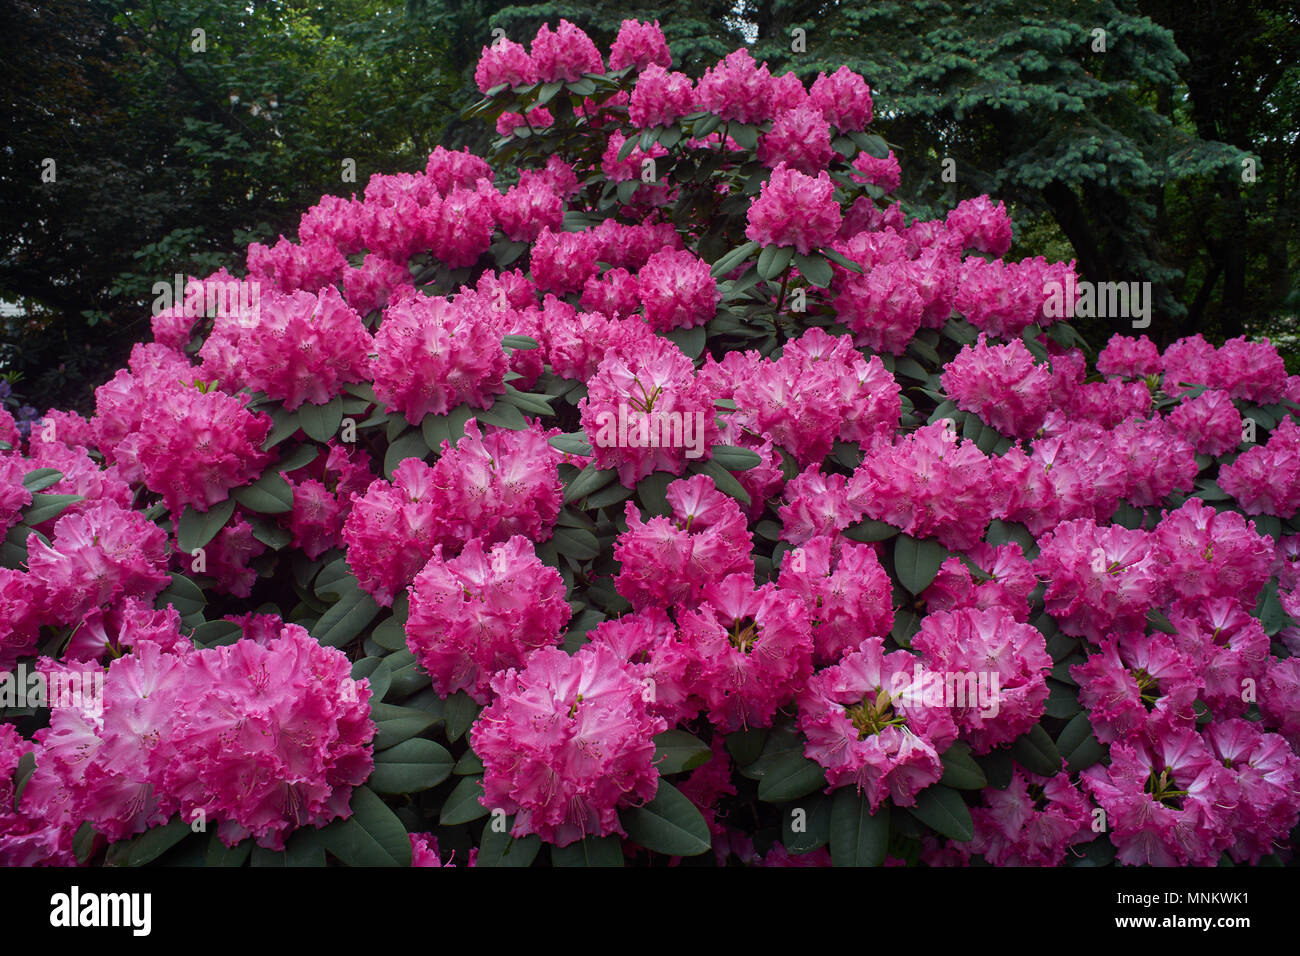 Rhododendron Germania pink purple blossom Lush rhododendron flowers close up Rhododendron blooming Rhododendron flowering spring Rhodendron blooms Stock Photo